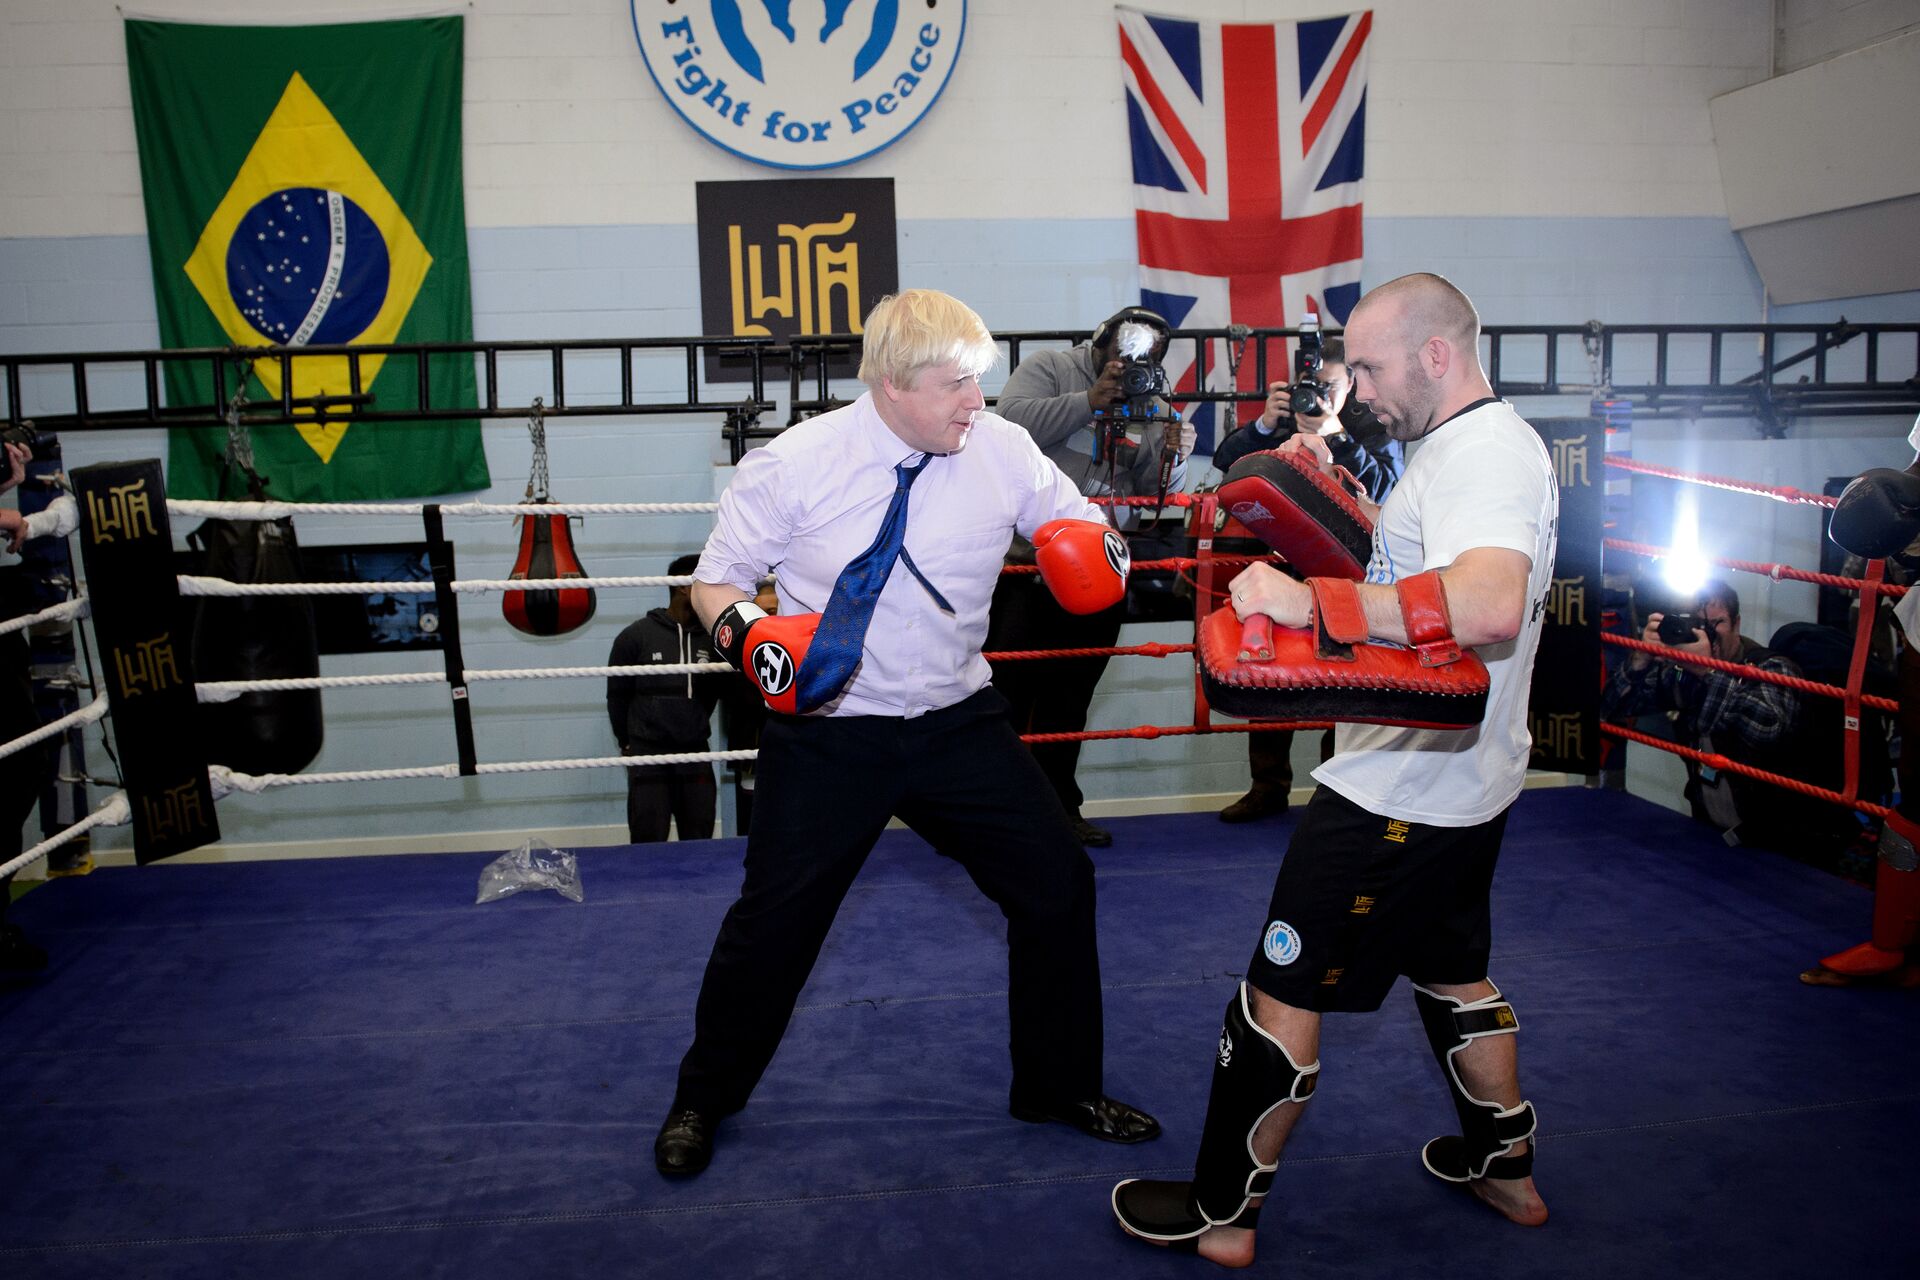 Mayor of London Boris Johnson (L) boxes with a trainer during his visit to Fight for Peace Academy in North Woolwich, London, on October 28, 2014 - Sputnik International, 1920, 01.11.2021